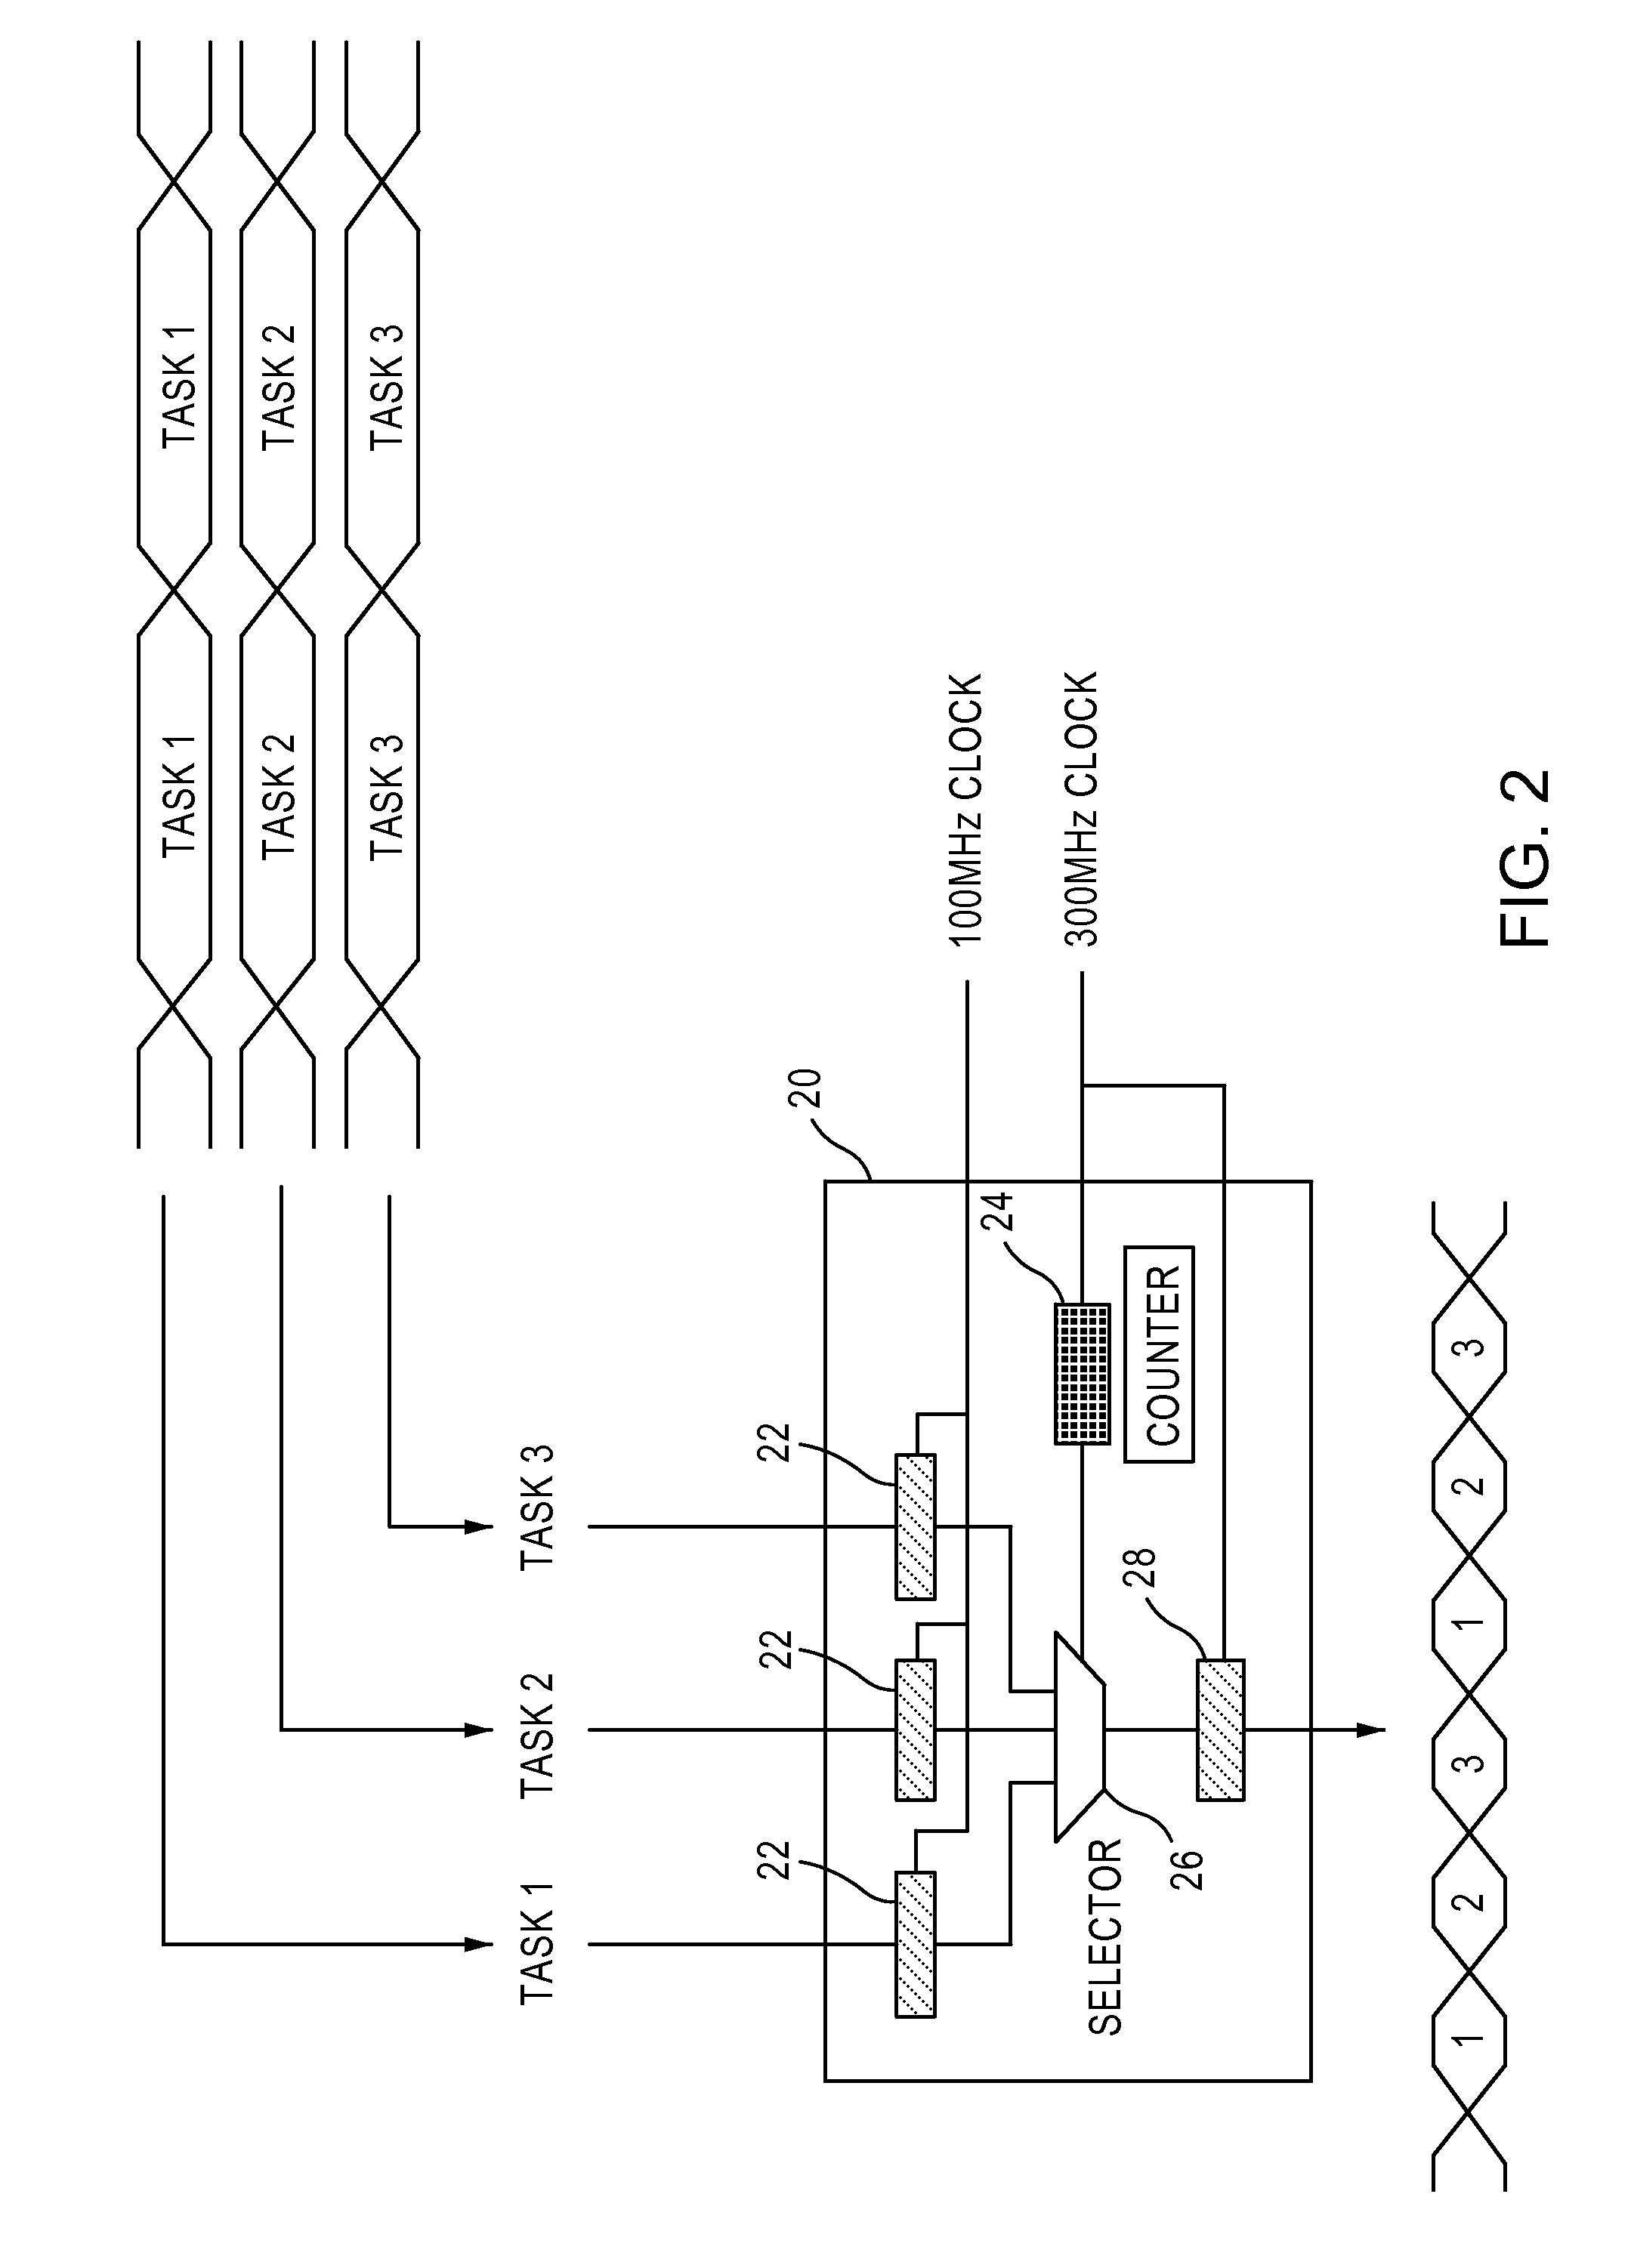 Reconfigurable circuit having a pipeline structure for carrying out time division multiple processing